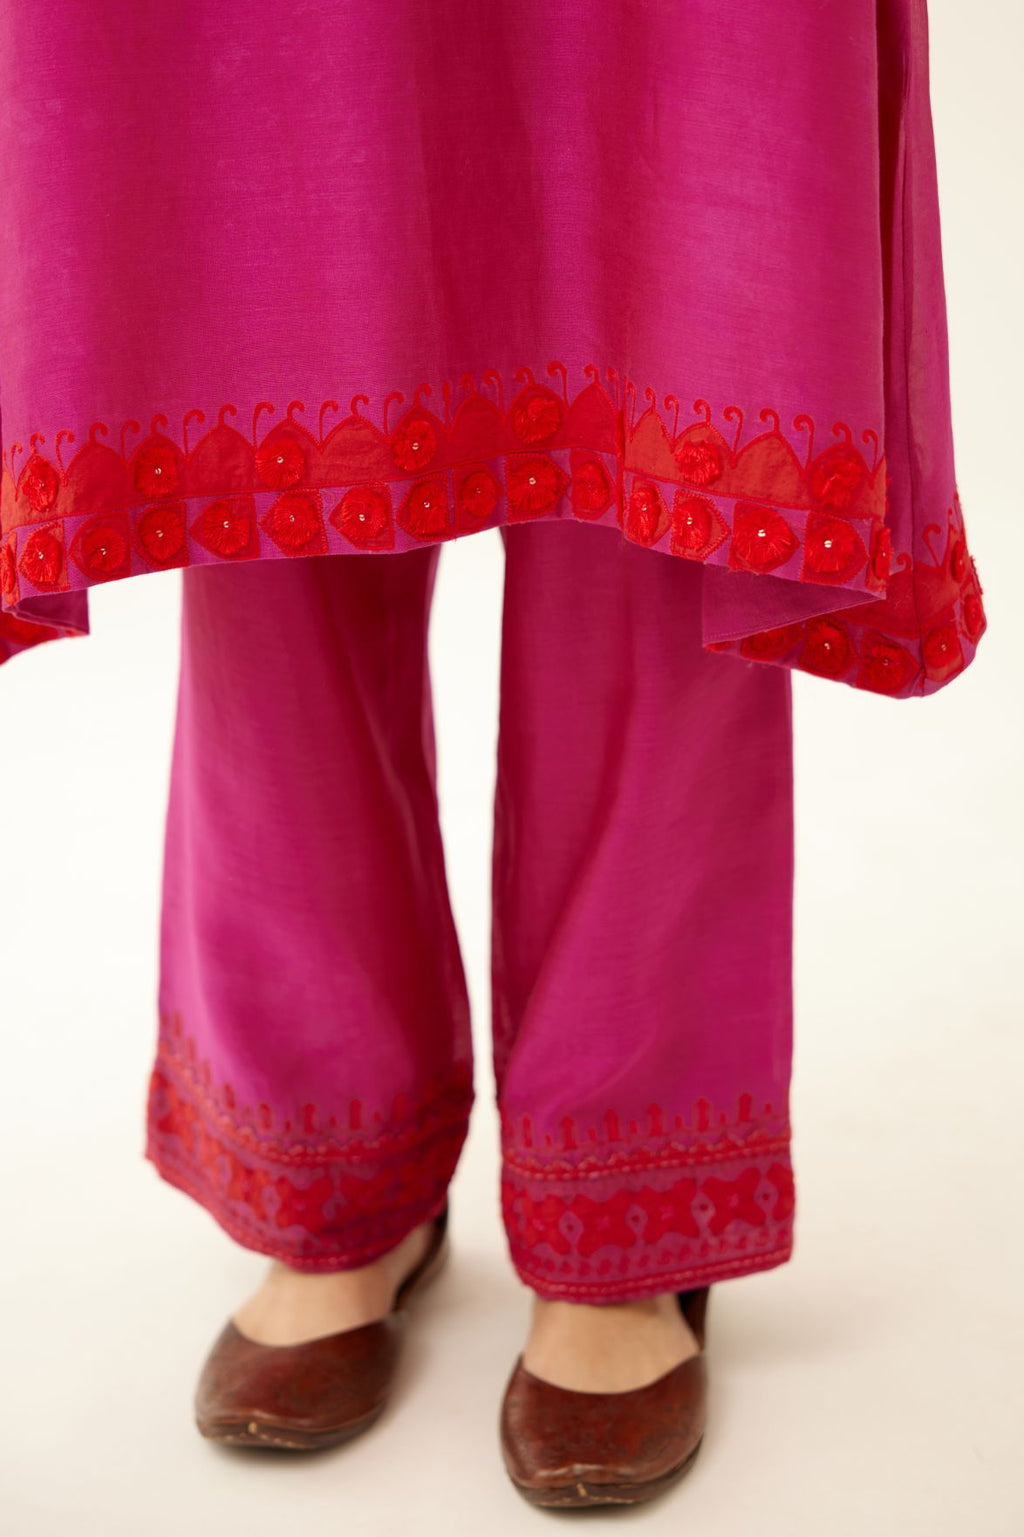 Fuchsia silk chanderi A-line kurta set, highlighted with contrast applique, tassels and sequins.